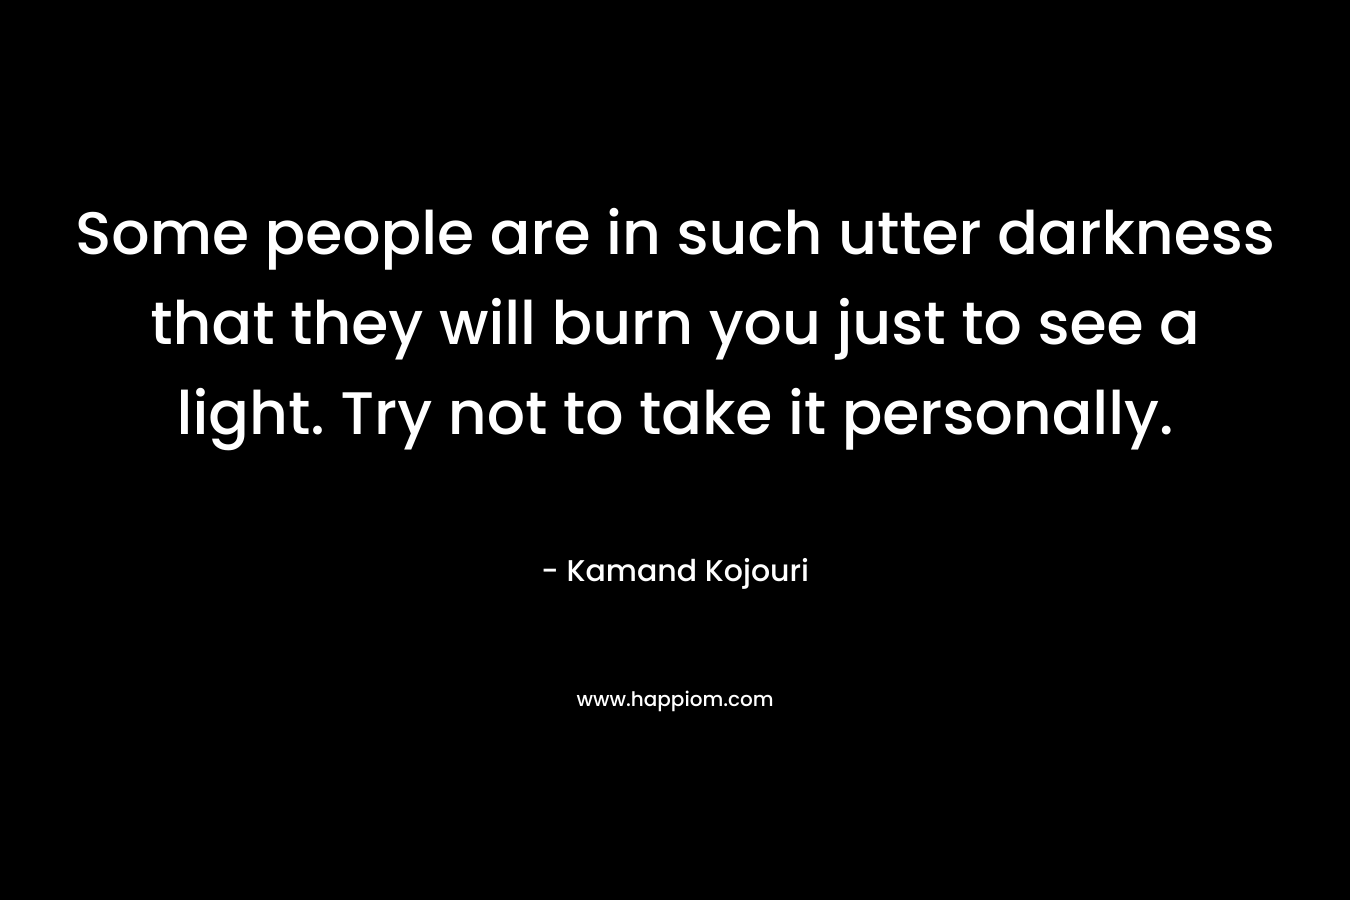 Some people are in such utter darkness that they will burn you just to see a light. Try not to take it personally. – Kamand Kojouri